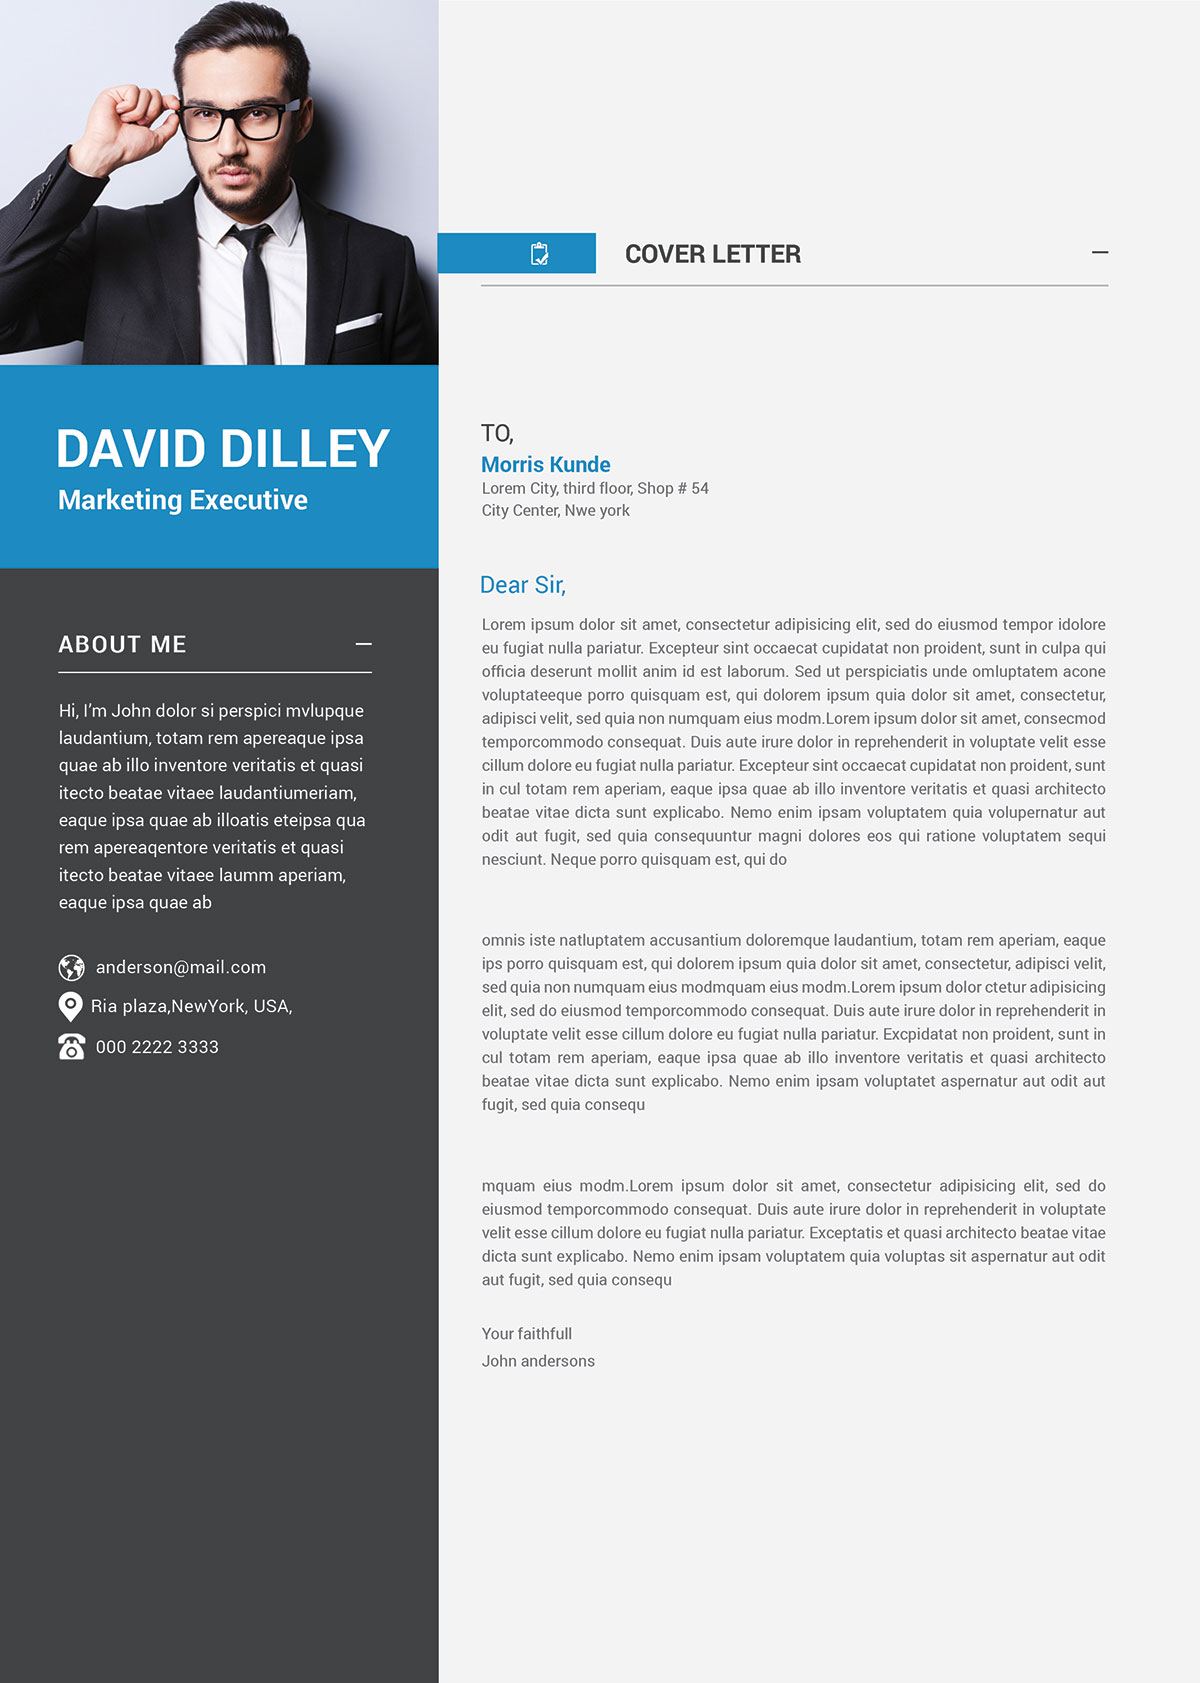 Free Professional CV Template & Cover Letter for Marketing